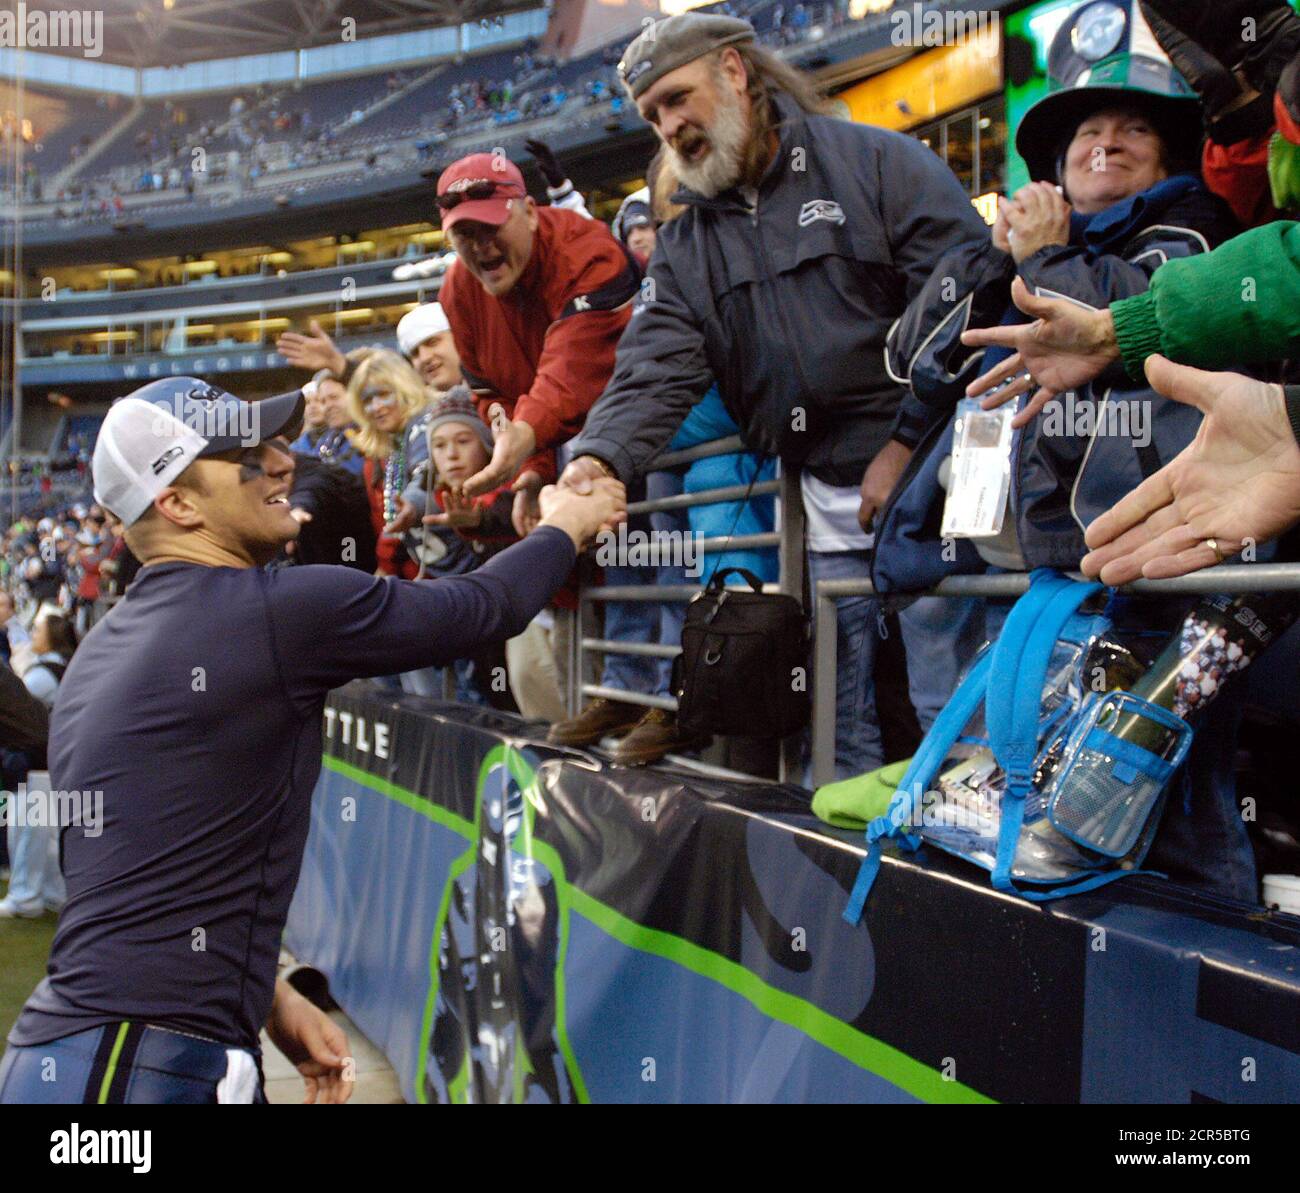 Seattle Seahawks quarterback Matt Hasselbeck shakes hands with fans following his team's win over the Atlanta Falcons 28-26, January 2, 2005, at Qwest Field in Seattle. It's the Seahawks first NFC West division title. REUTERS/Robert Sorbo  RSS Stock Photo